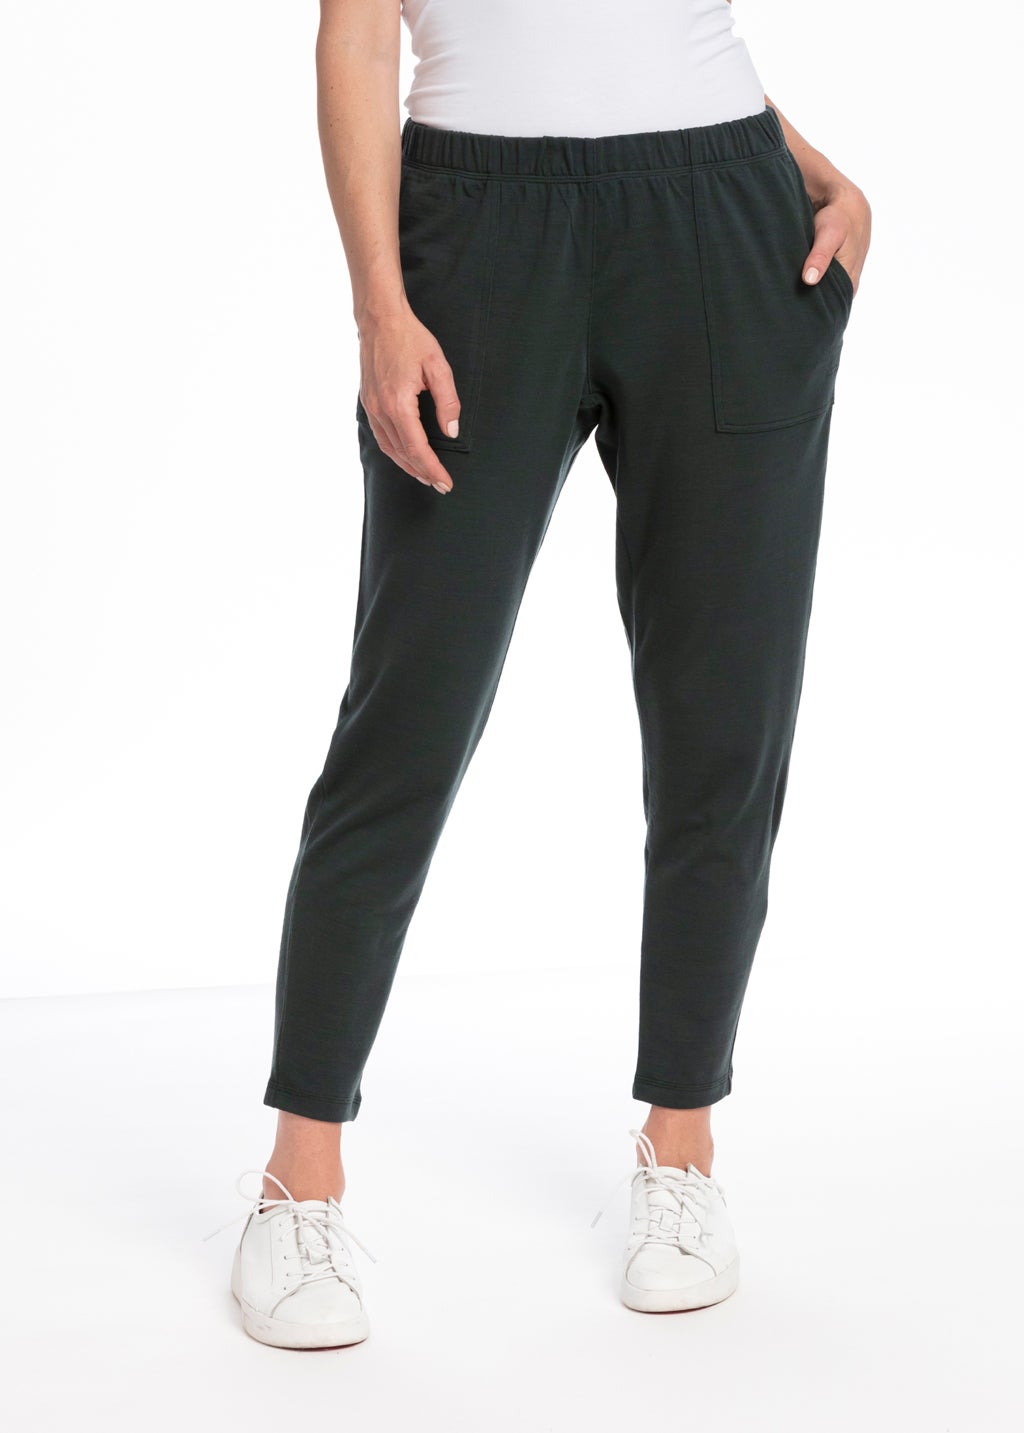 Brass Monkeys - 100% Pure Merino Wool - Leggings - Made in New Zealand -  Warm & Soft Womens Thermal Base Layer Pants - Perfect for Sports, Black  Small : Amazon.co.uk: Sports & Outdoors